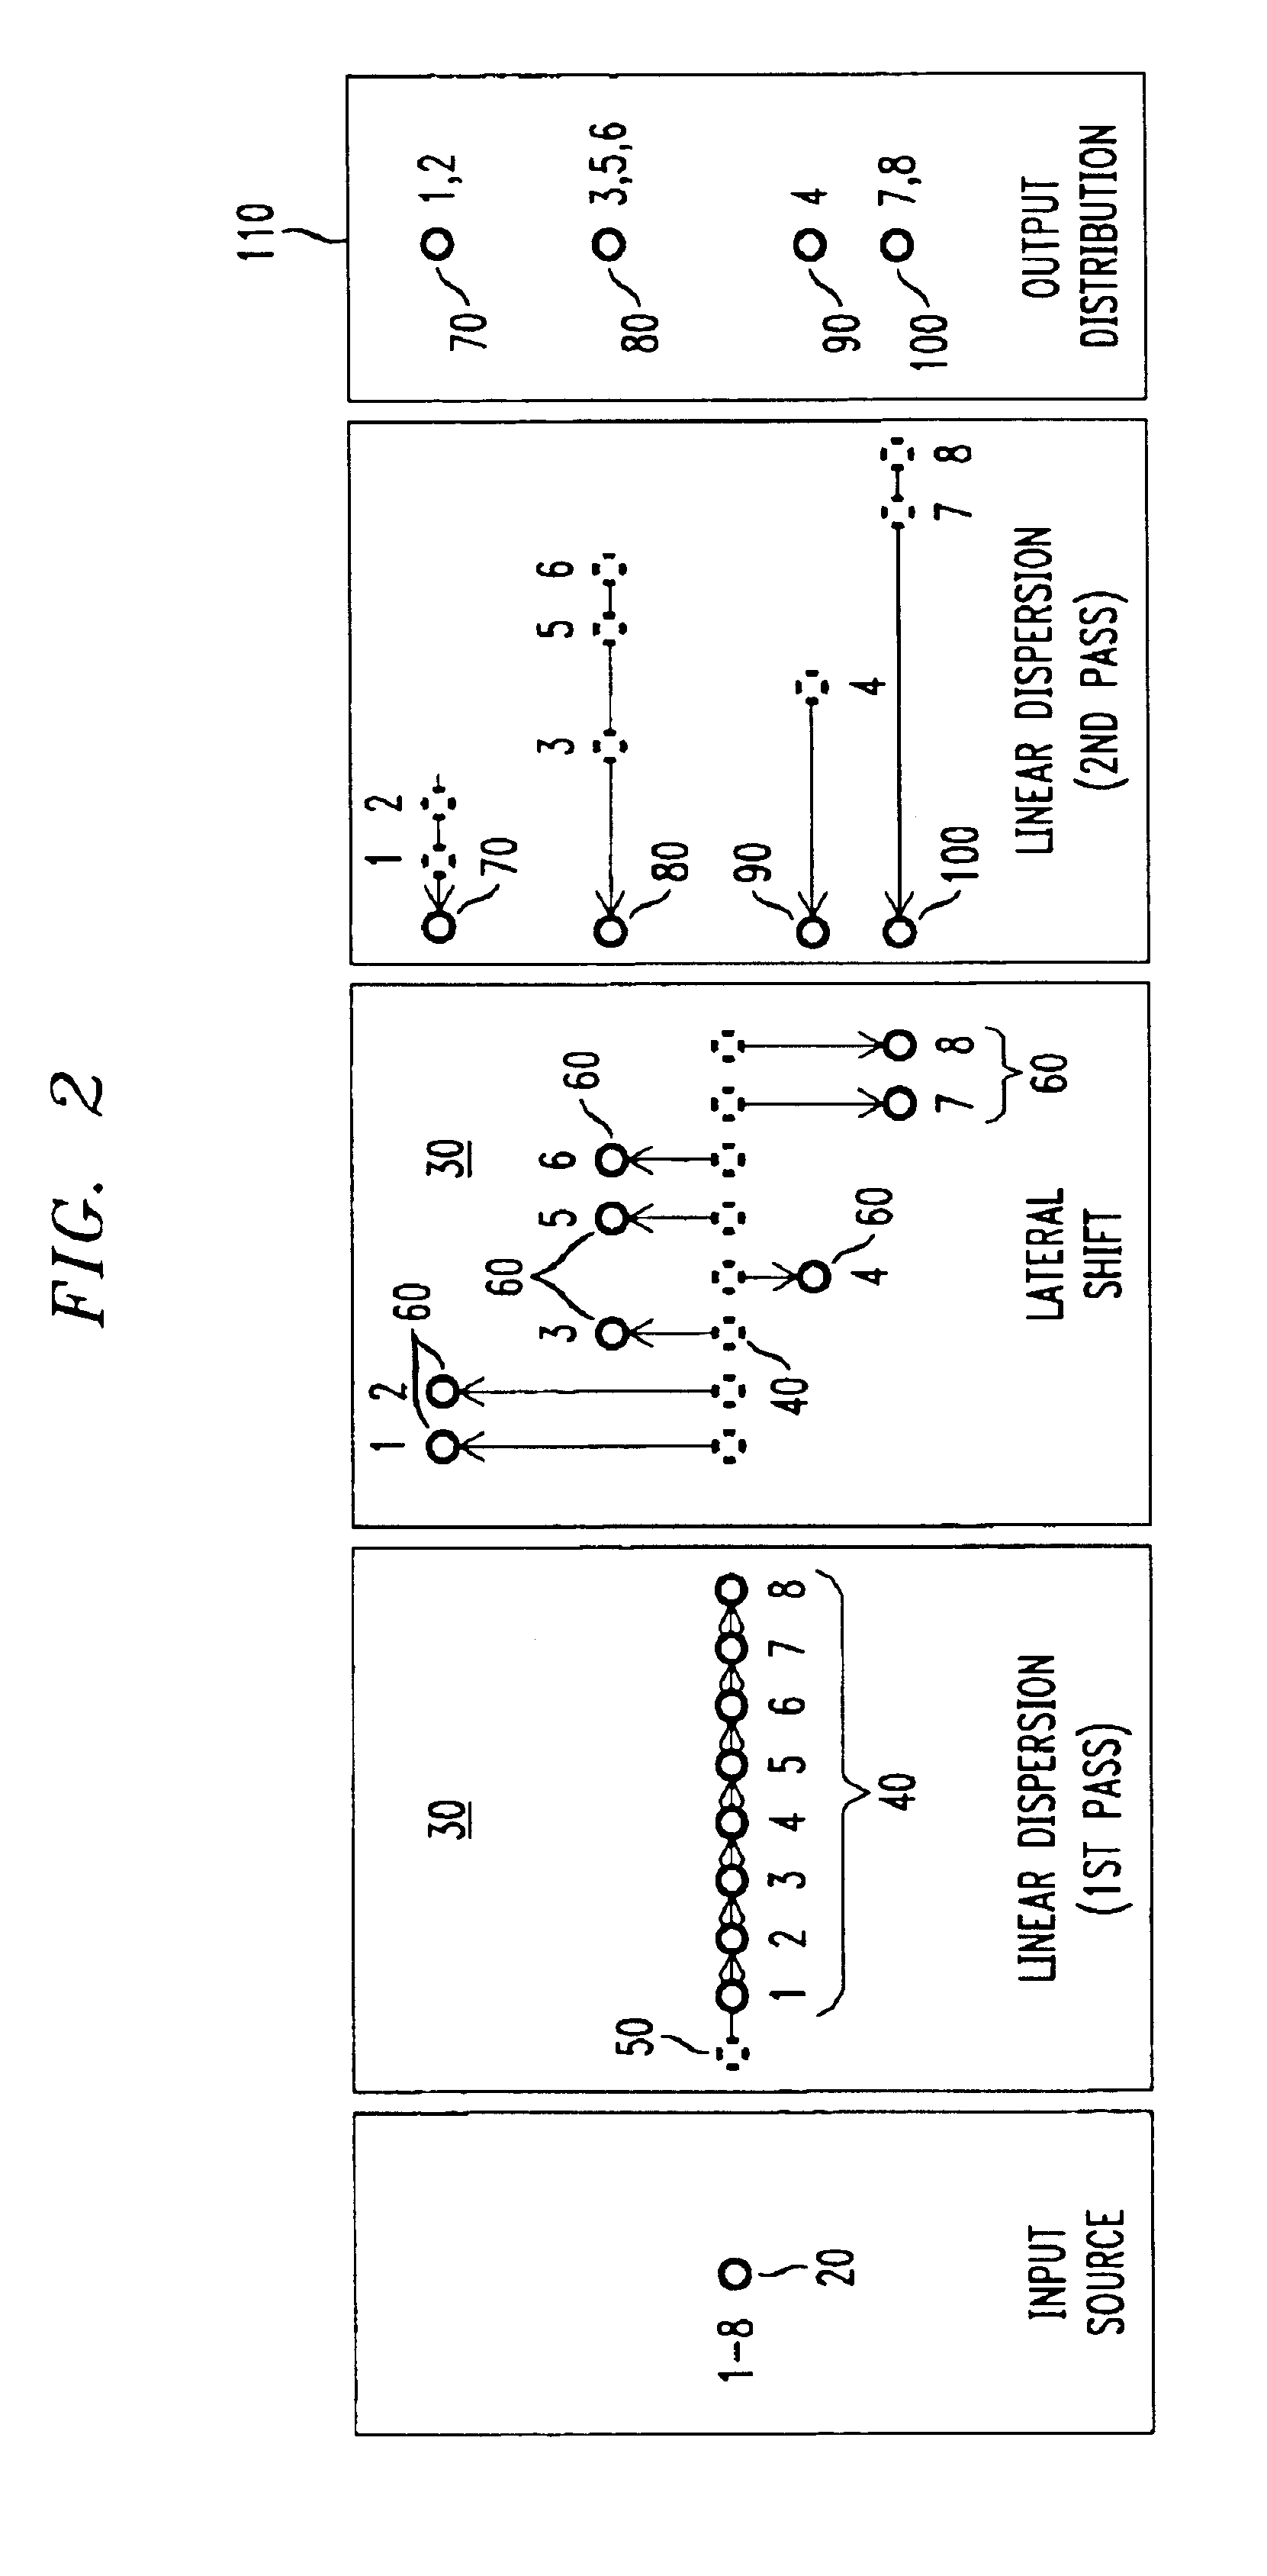 Method and apparatus for spatial-shift wavelength multiplexing in communication systems